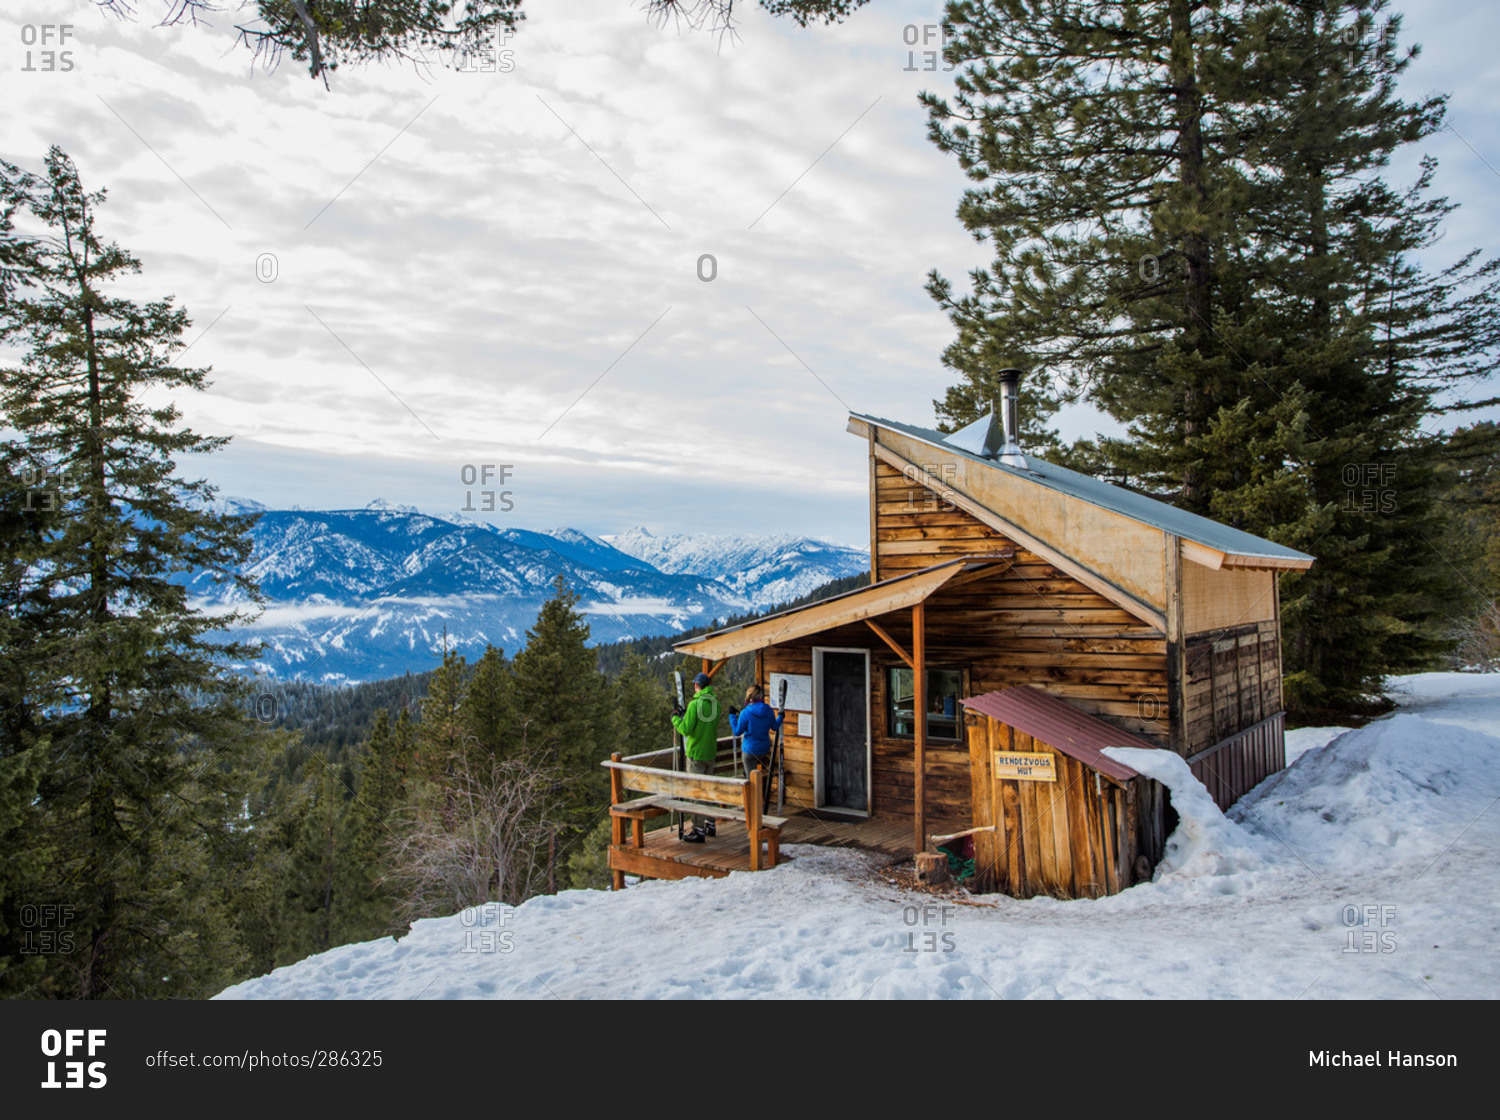 Two cross country skiers on the Mazama backcountry stop at one of the Rendezvous Huts in Washington's Methow Valley.